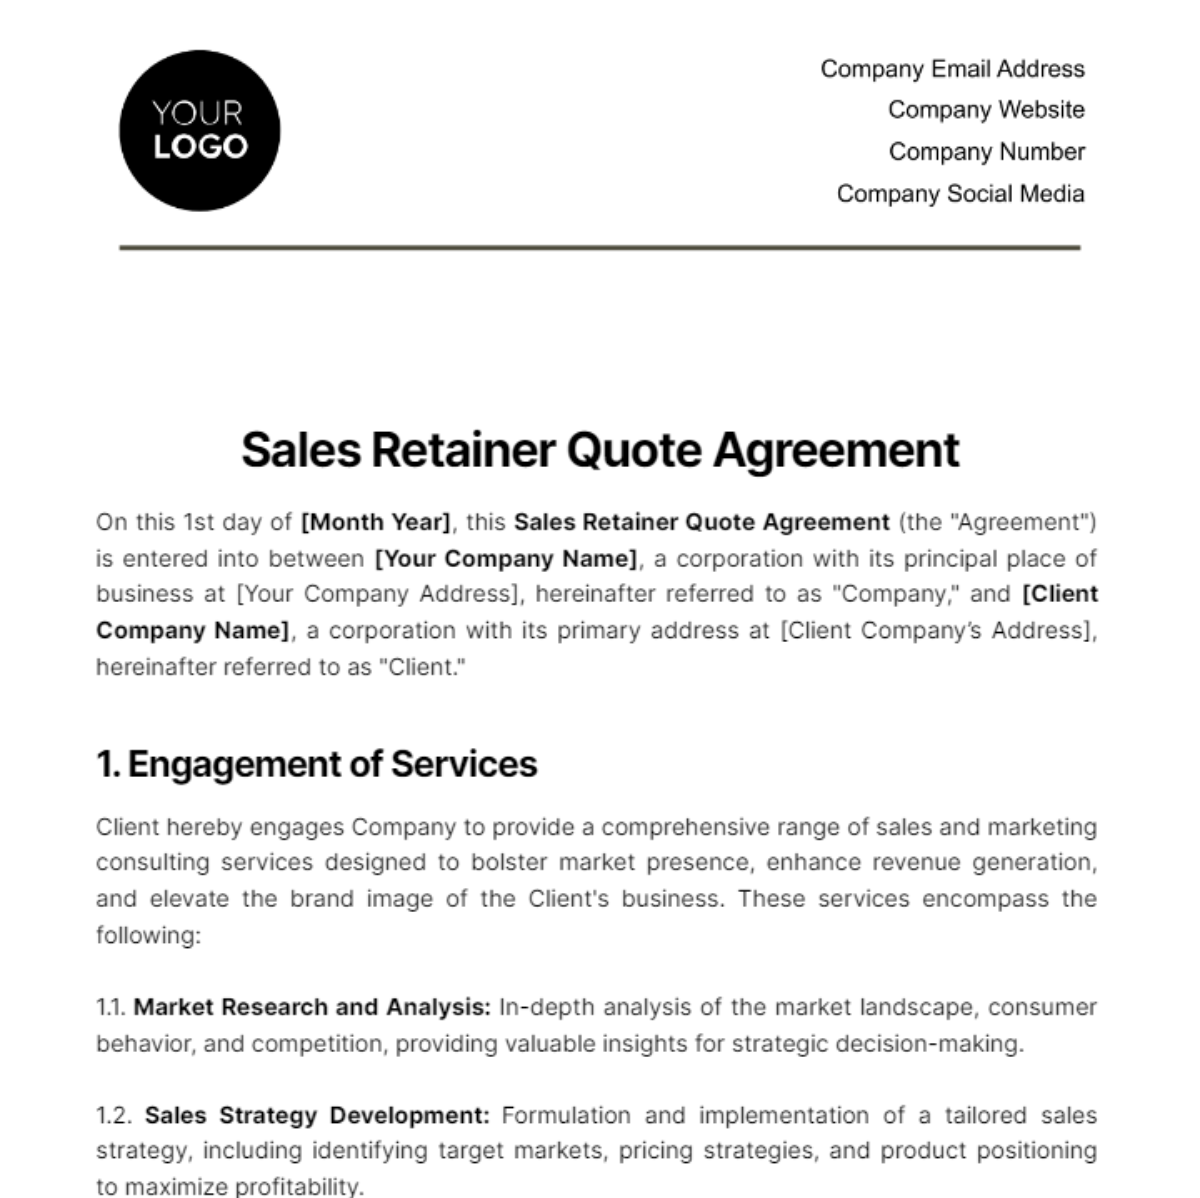 Free Sales Retainer Quote Agreement Template